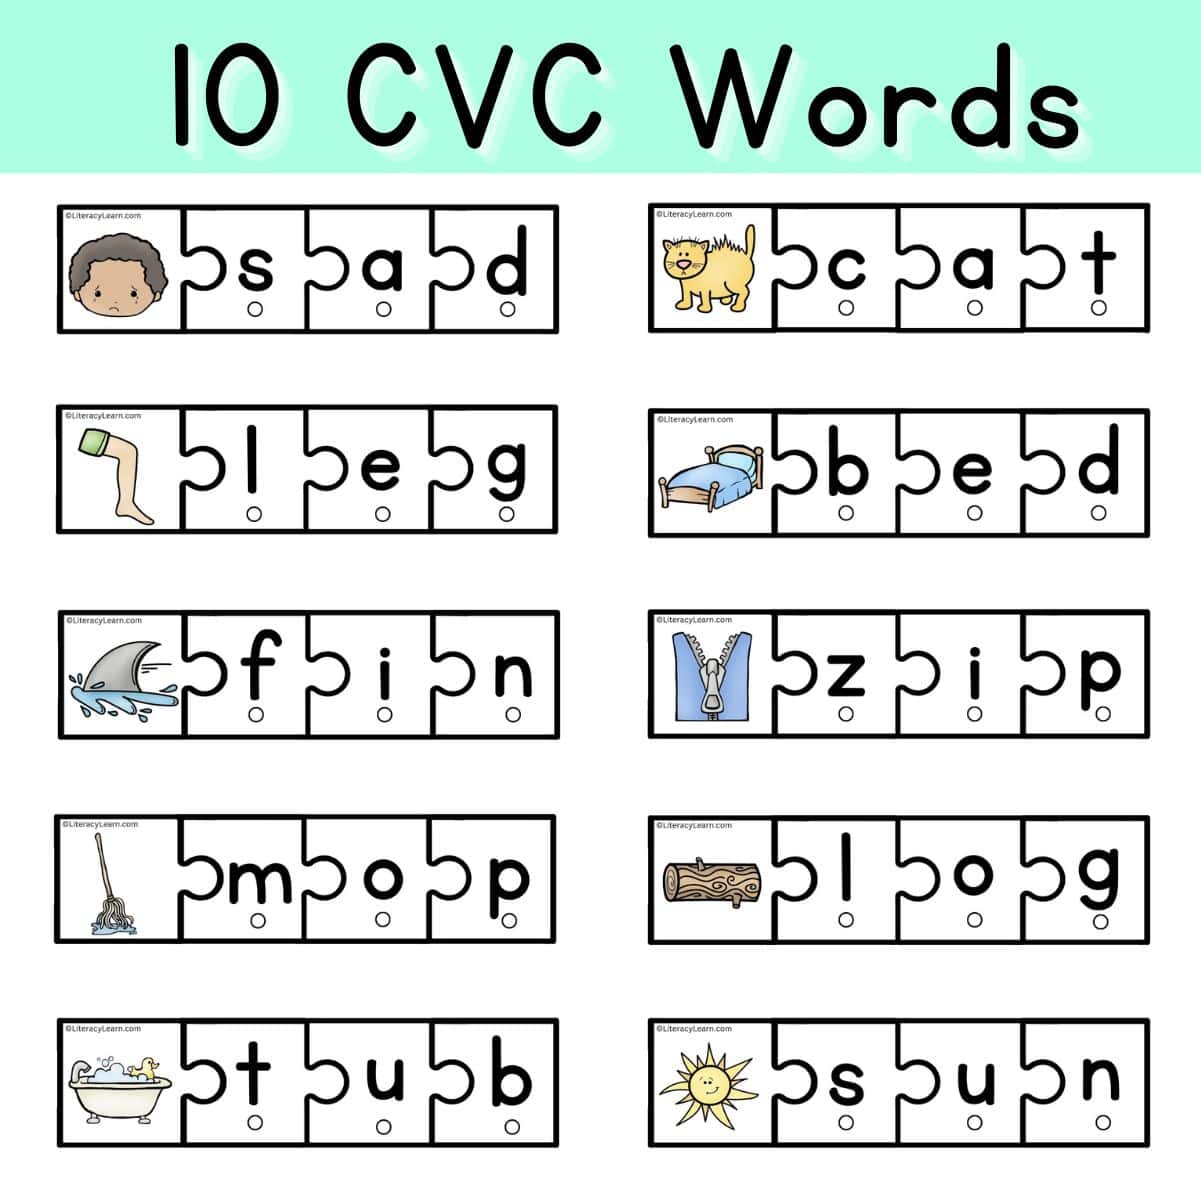 All 10 CVC Word puzzles with pictures.